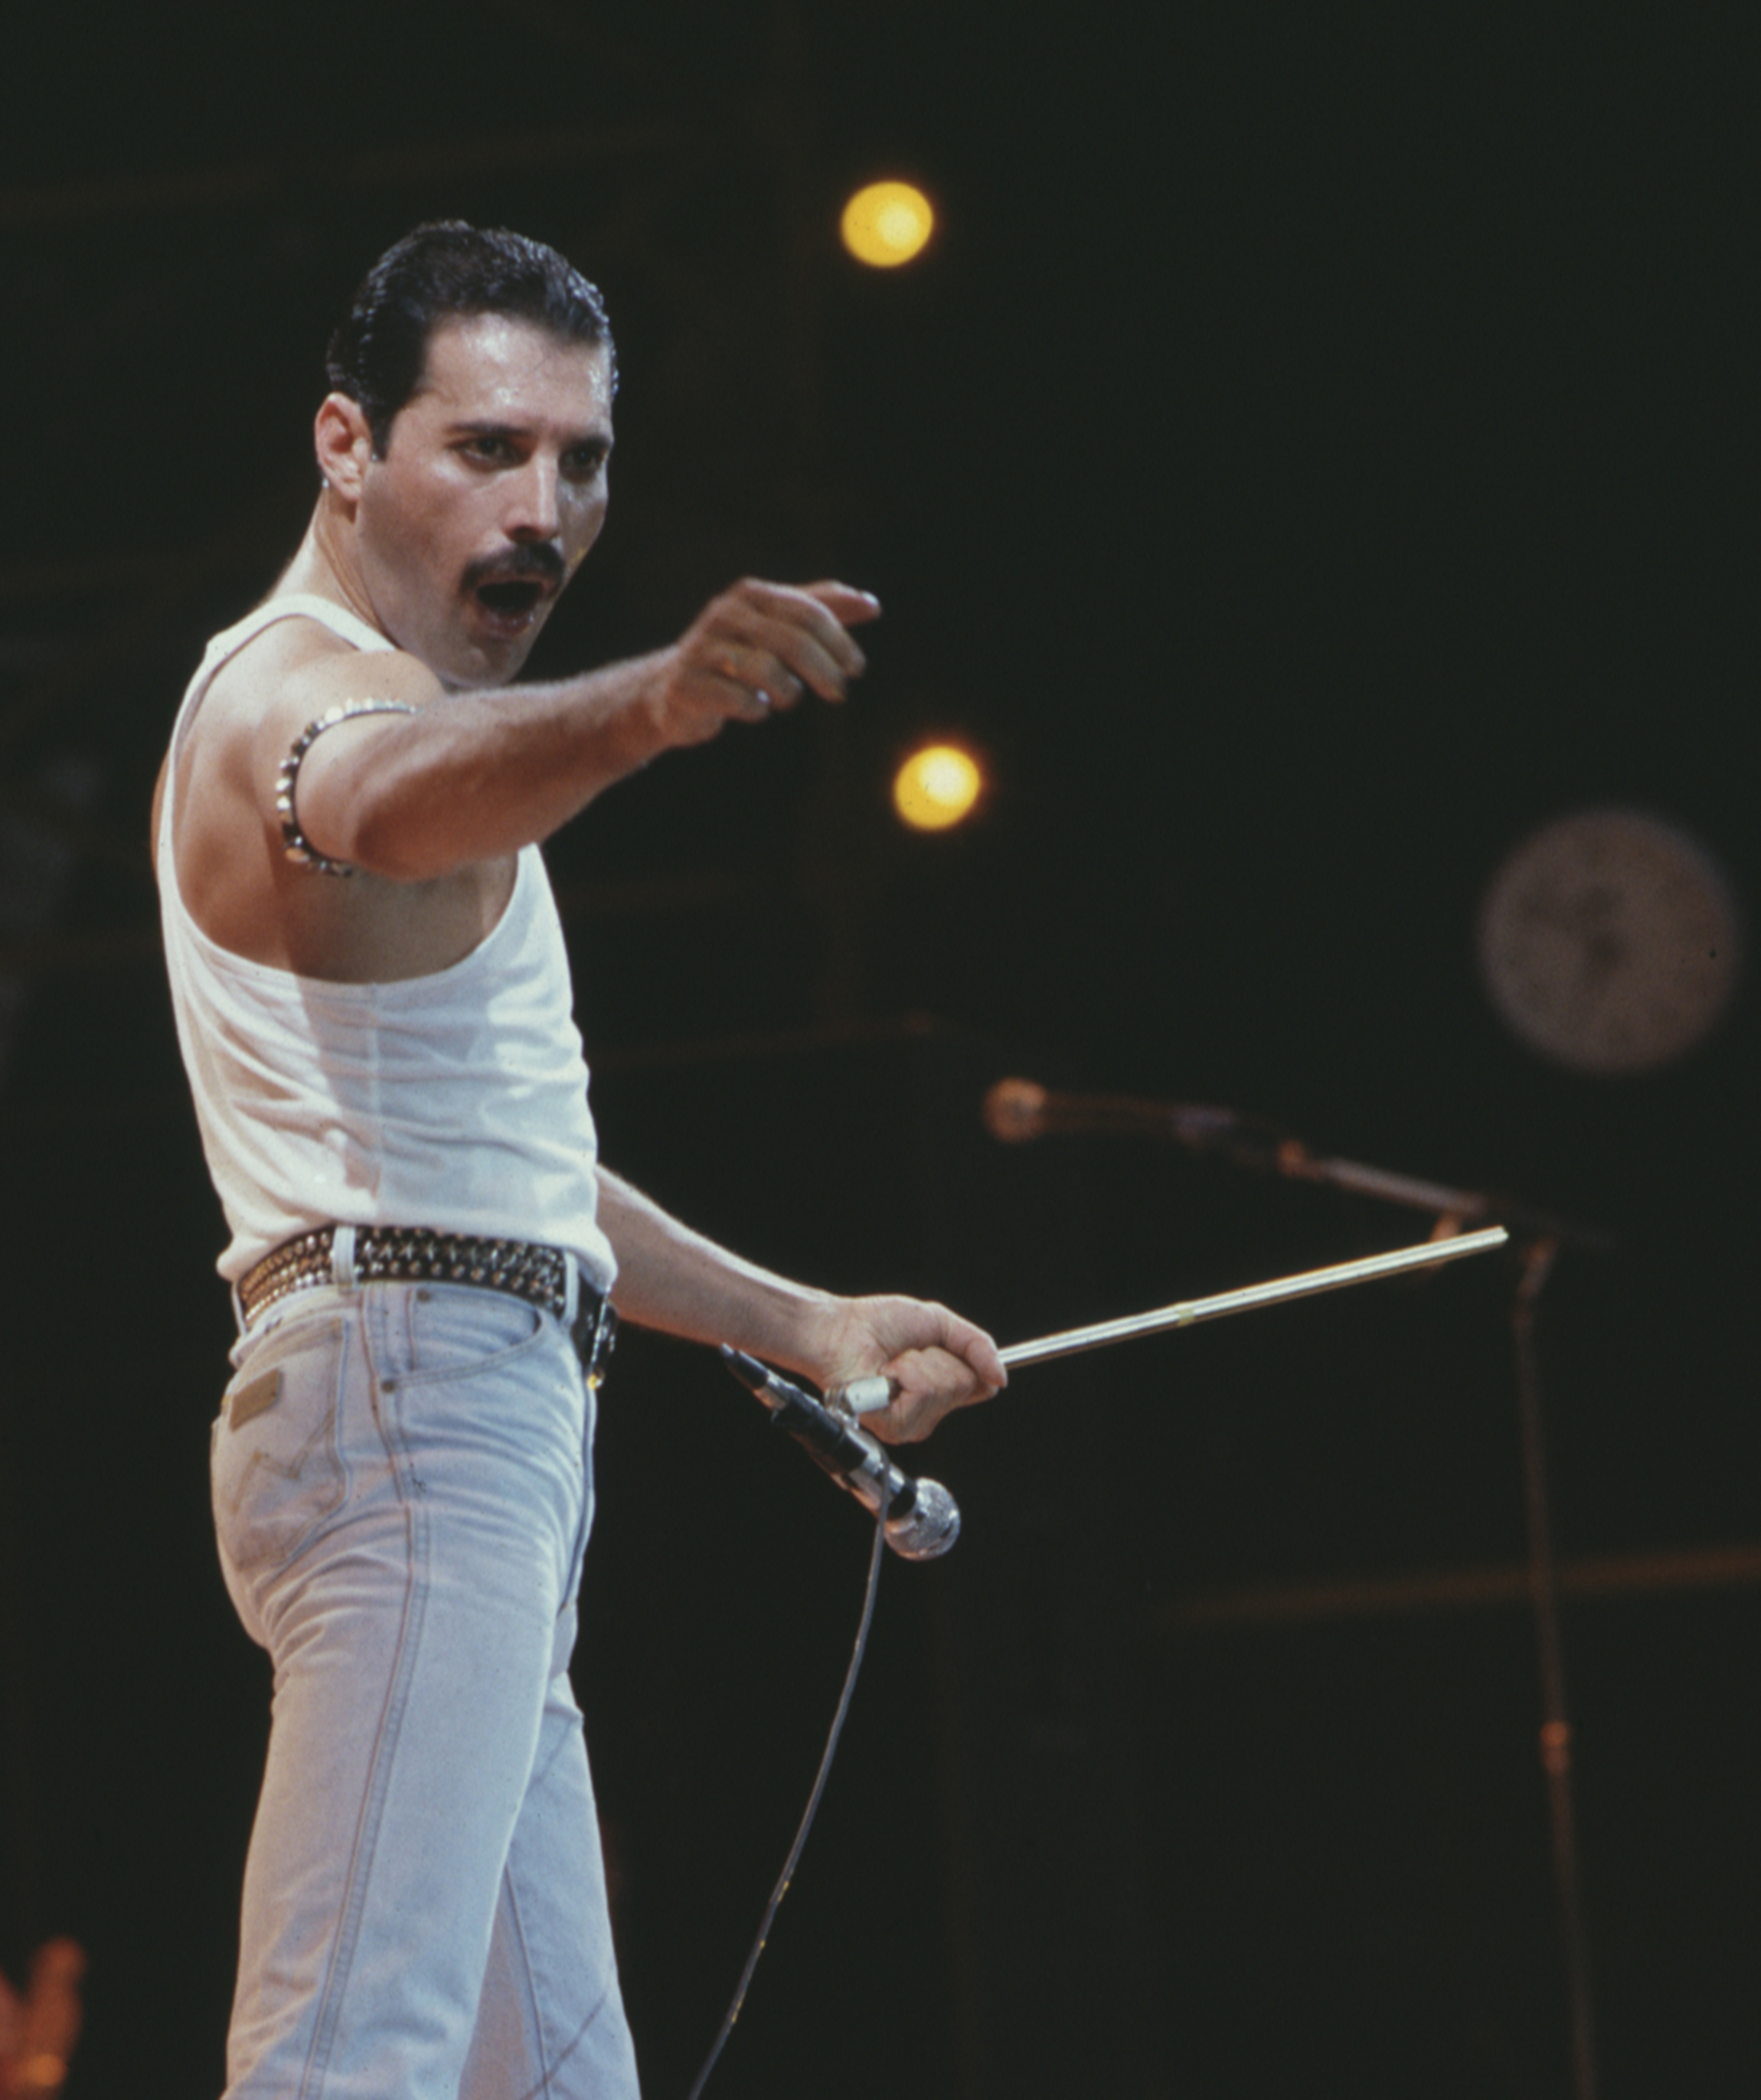 Undated Handout Photo of Freddie Mercury, of the pop band Queen, performing on stage during the Live Aid concert.